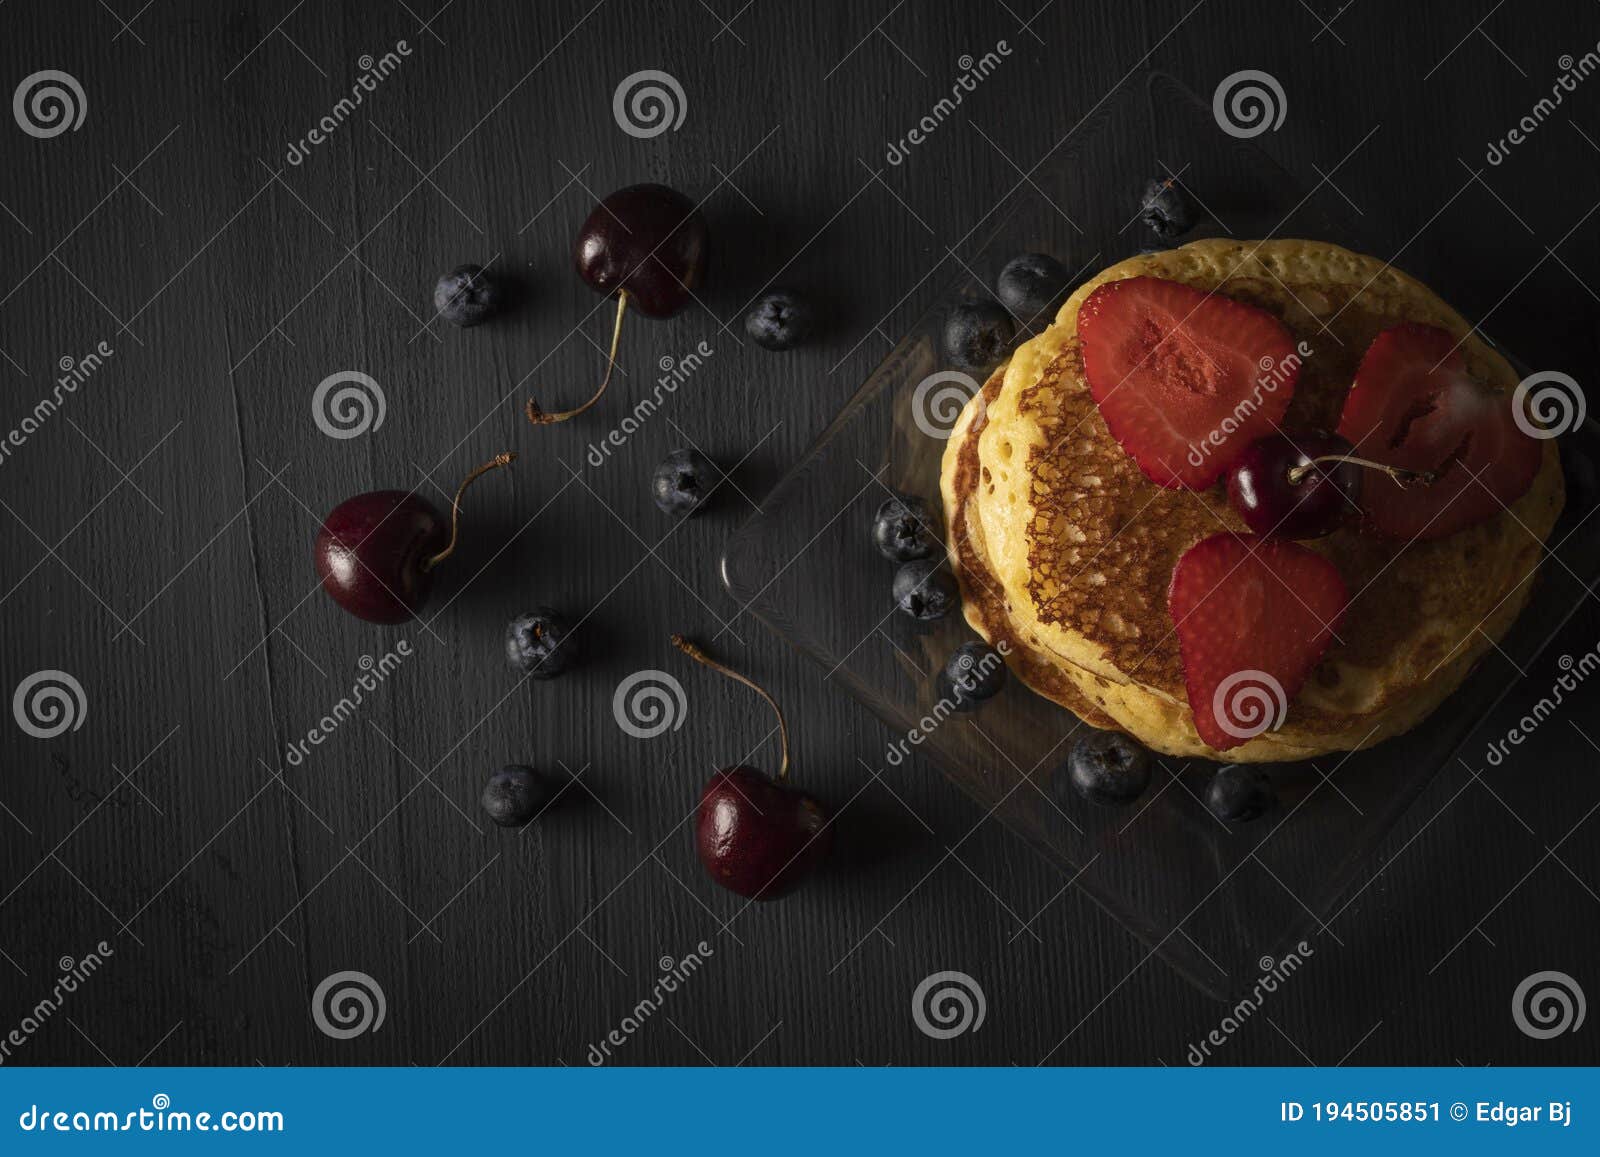 hot cakes stacked with cherries, strawberries and blueberries